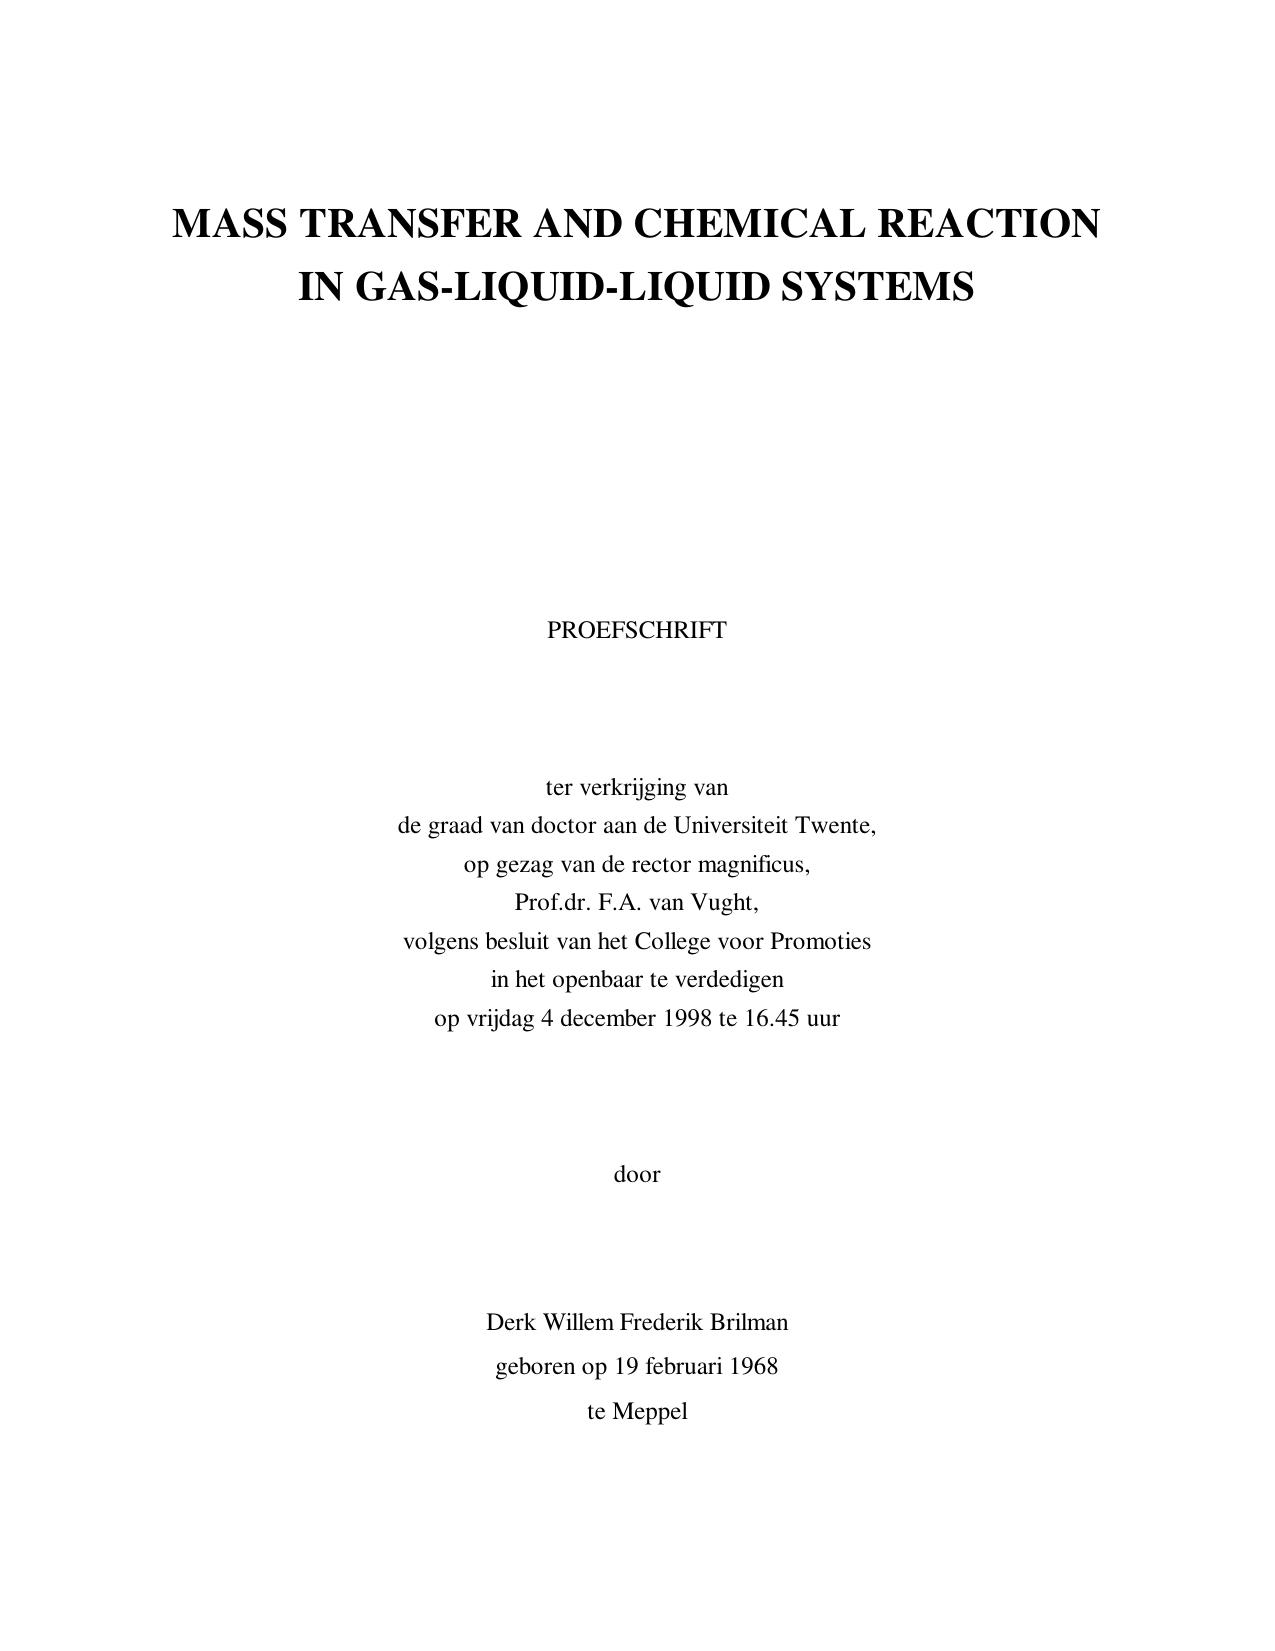 Mass transfer and chemical reaction in gas-liquid-liquid systems.